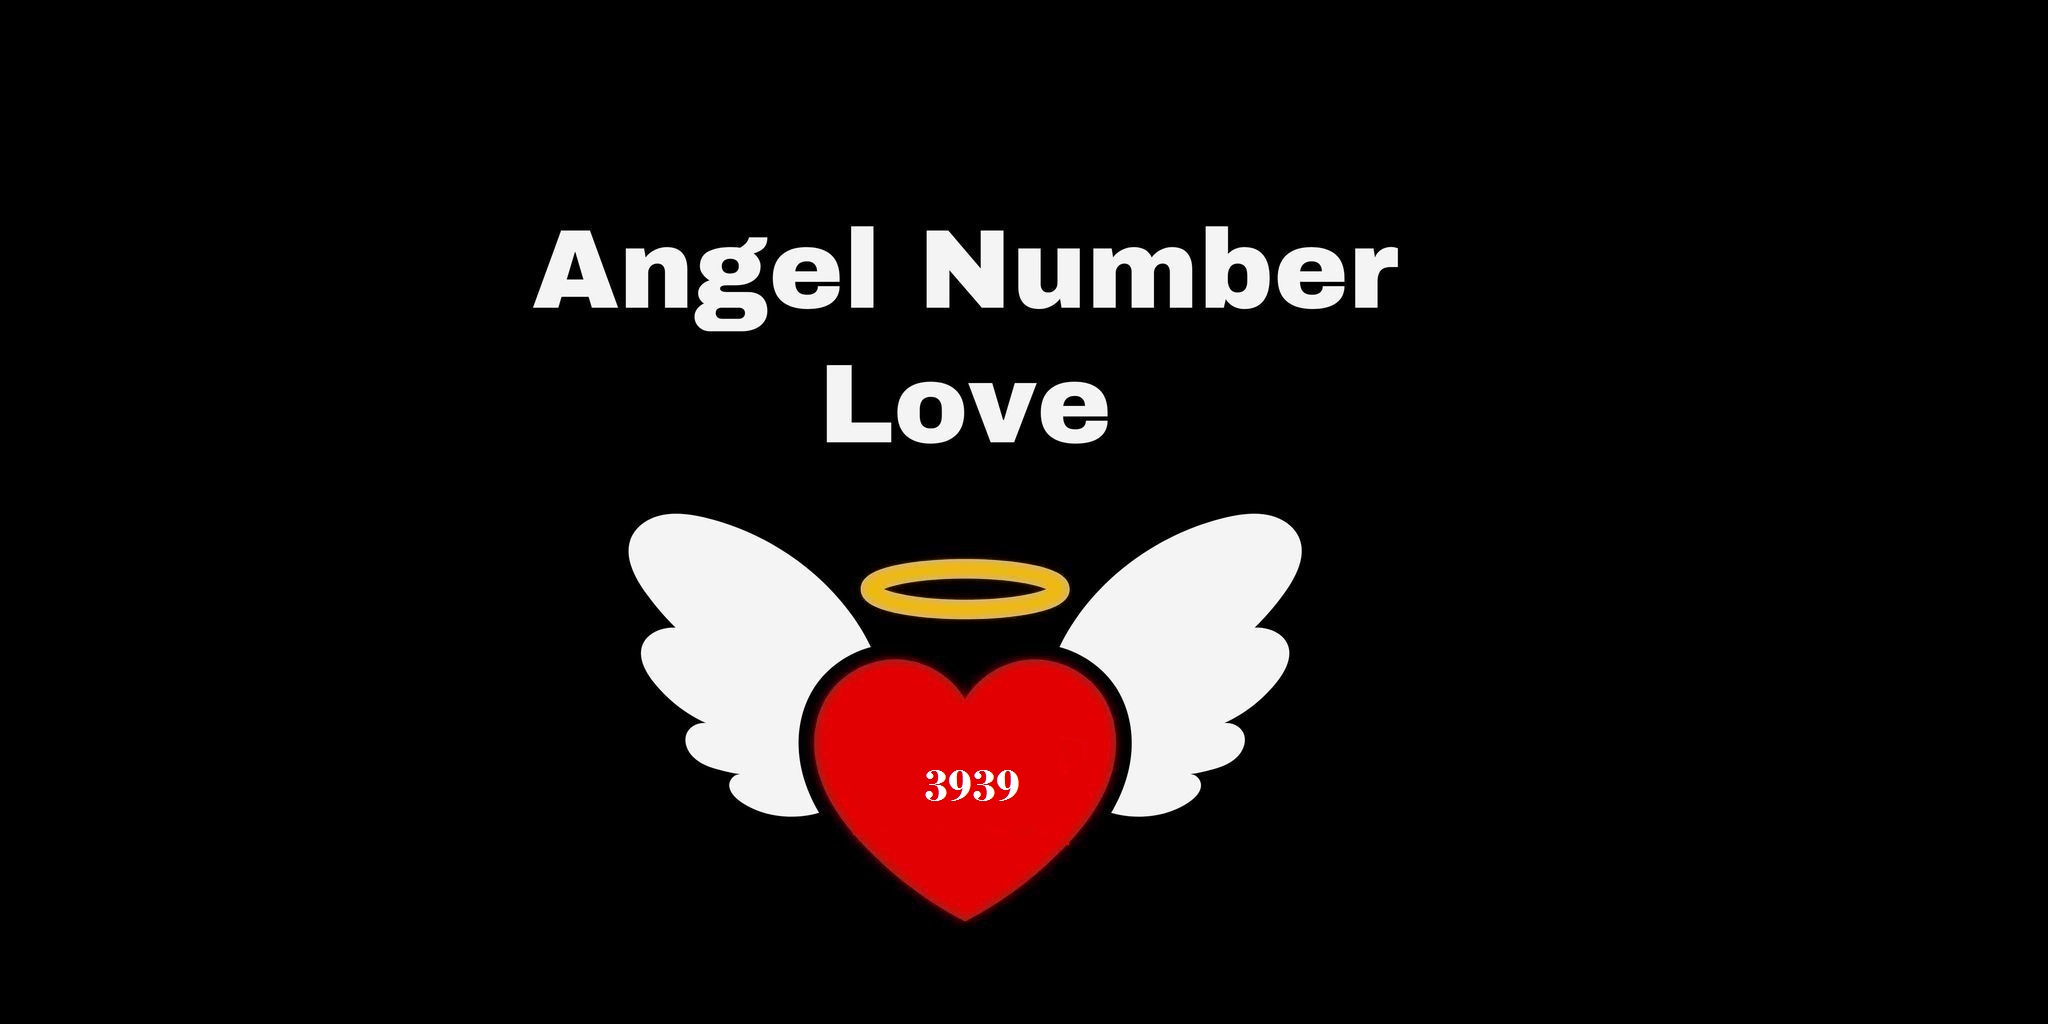 3939 Angel Number Meaning In Love